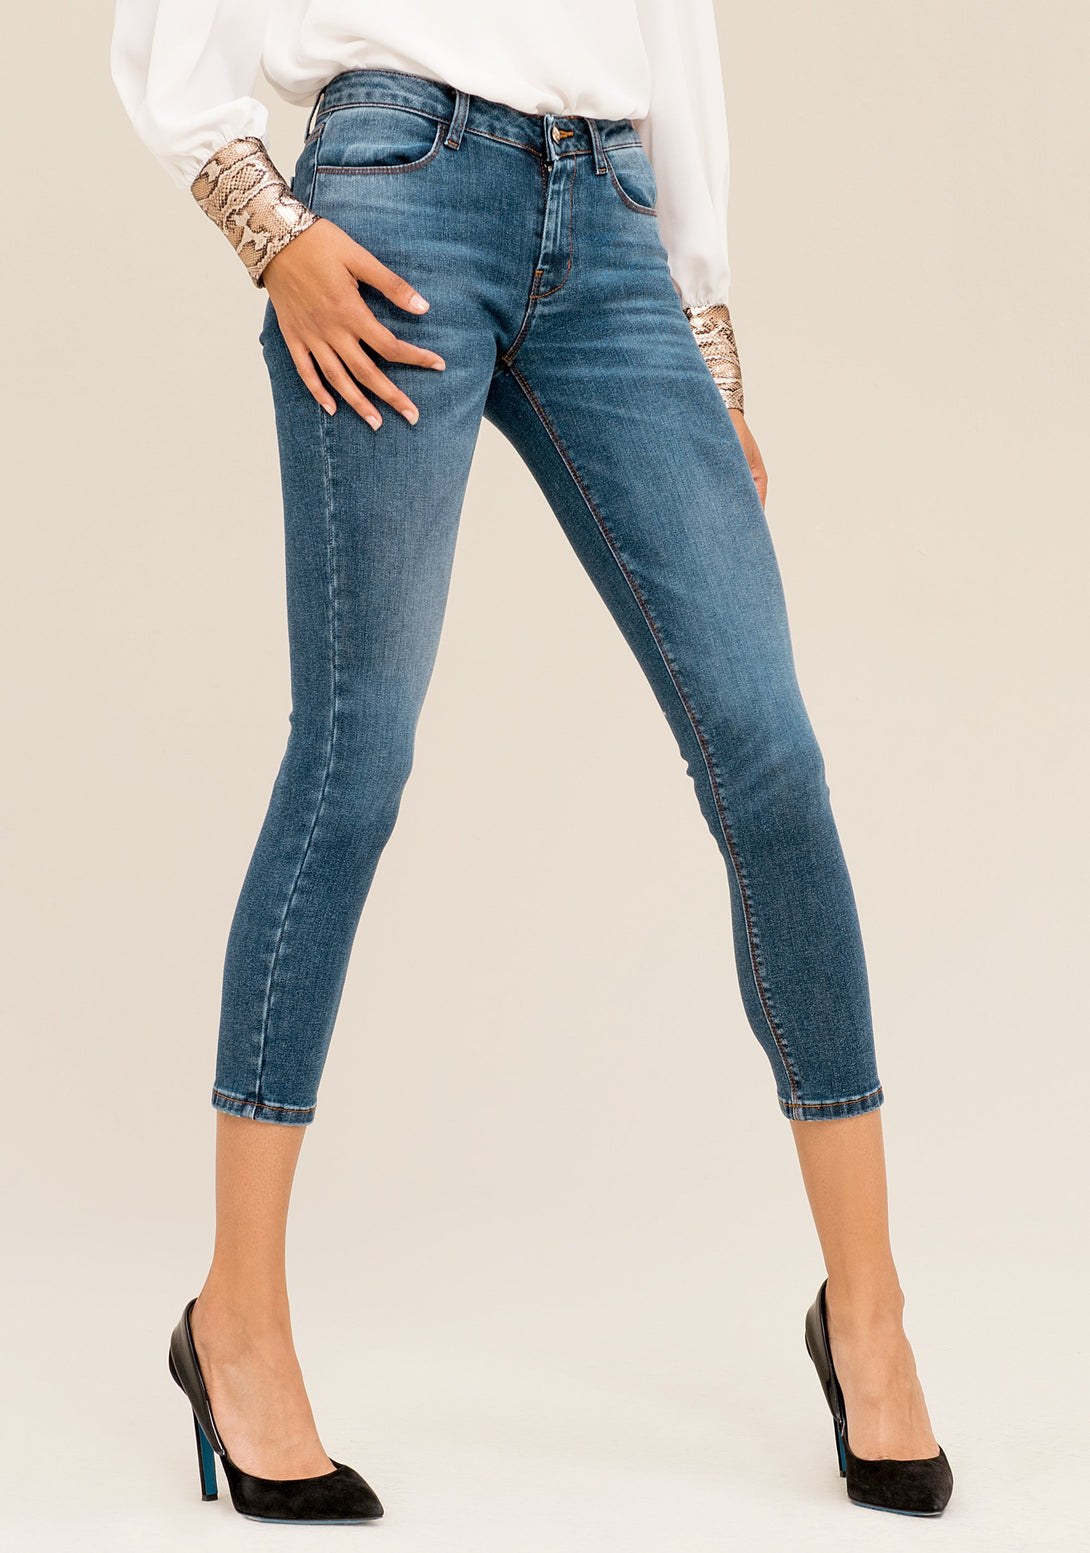 Jeans cropped skinny fit made in stretch denim with middle wash